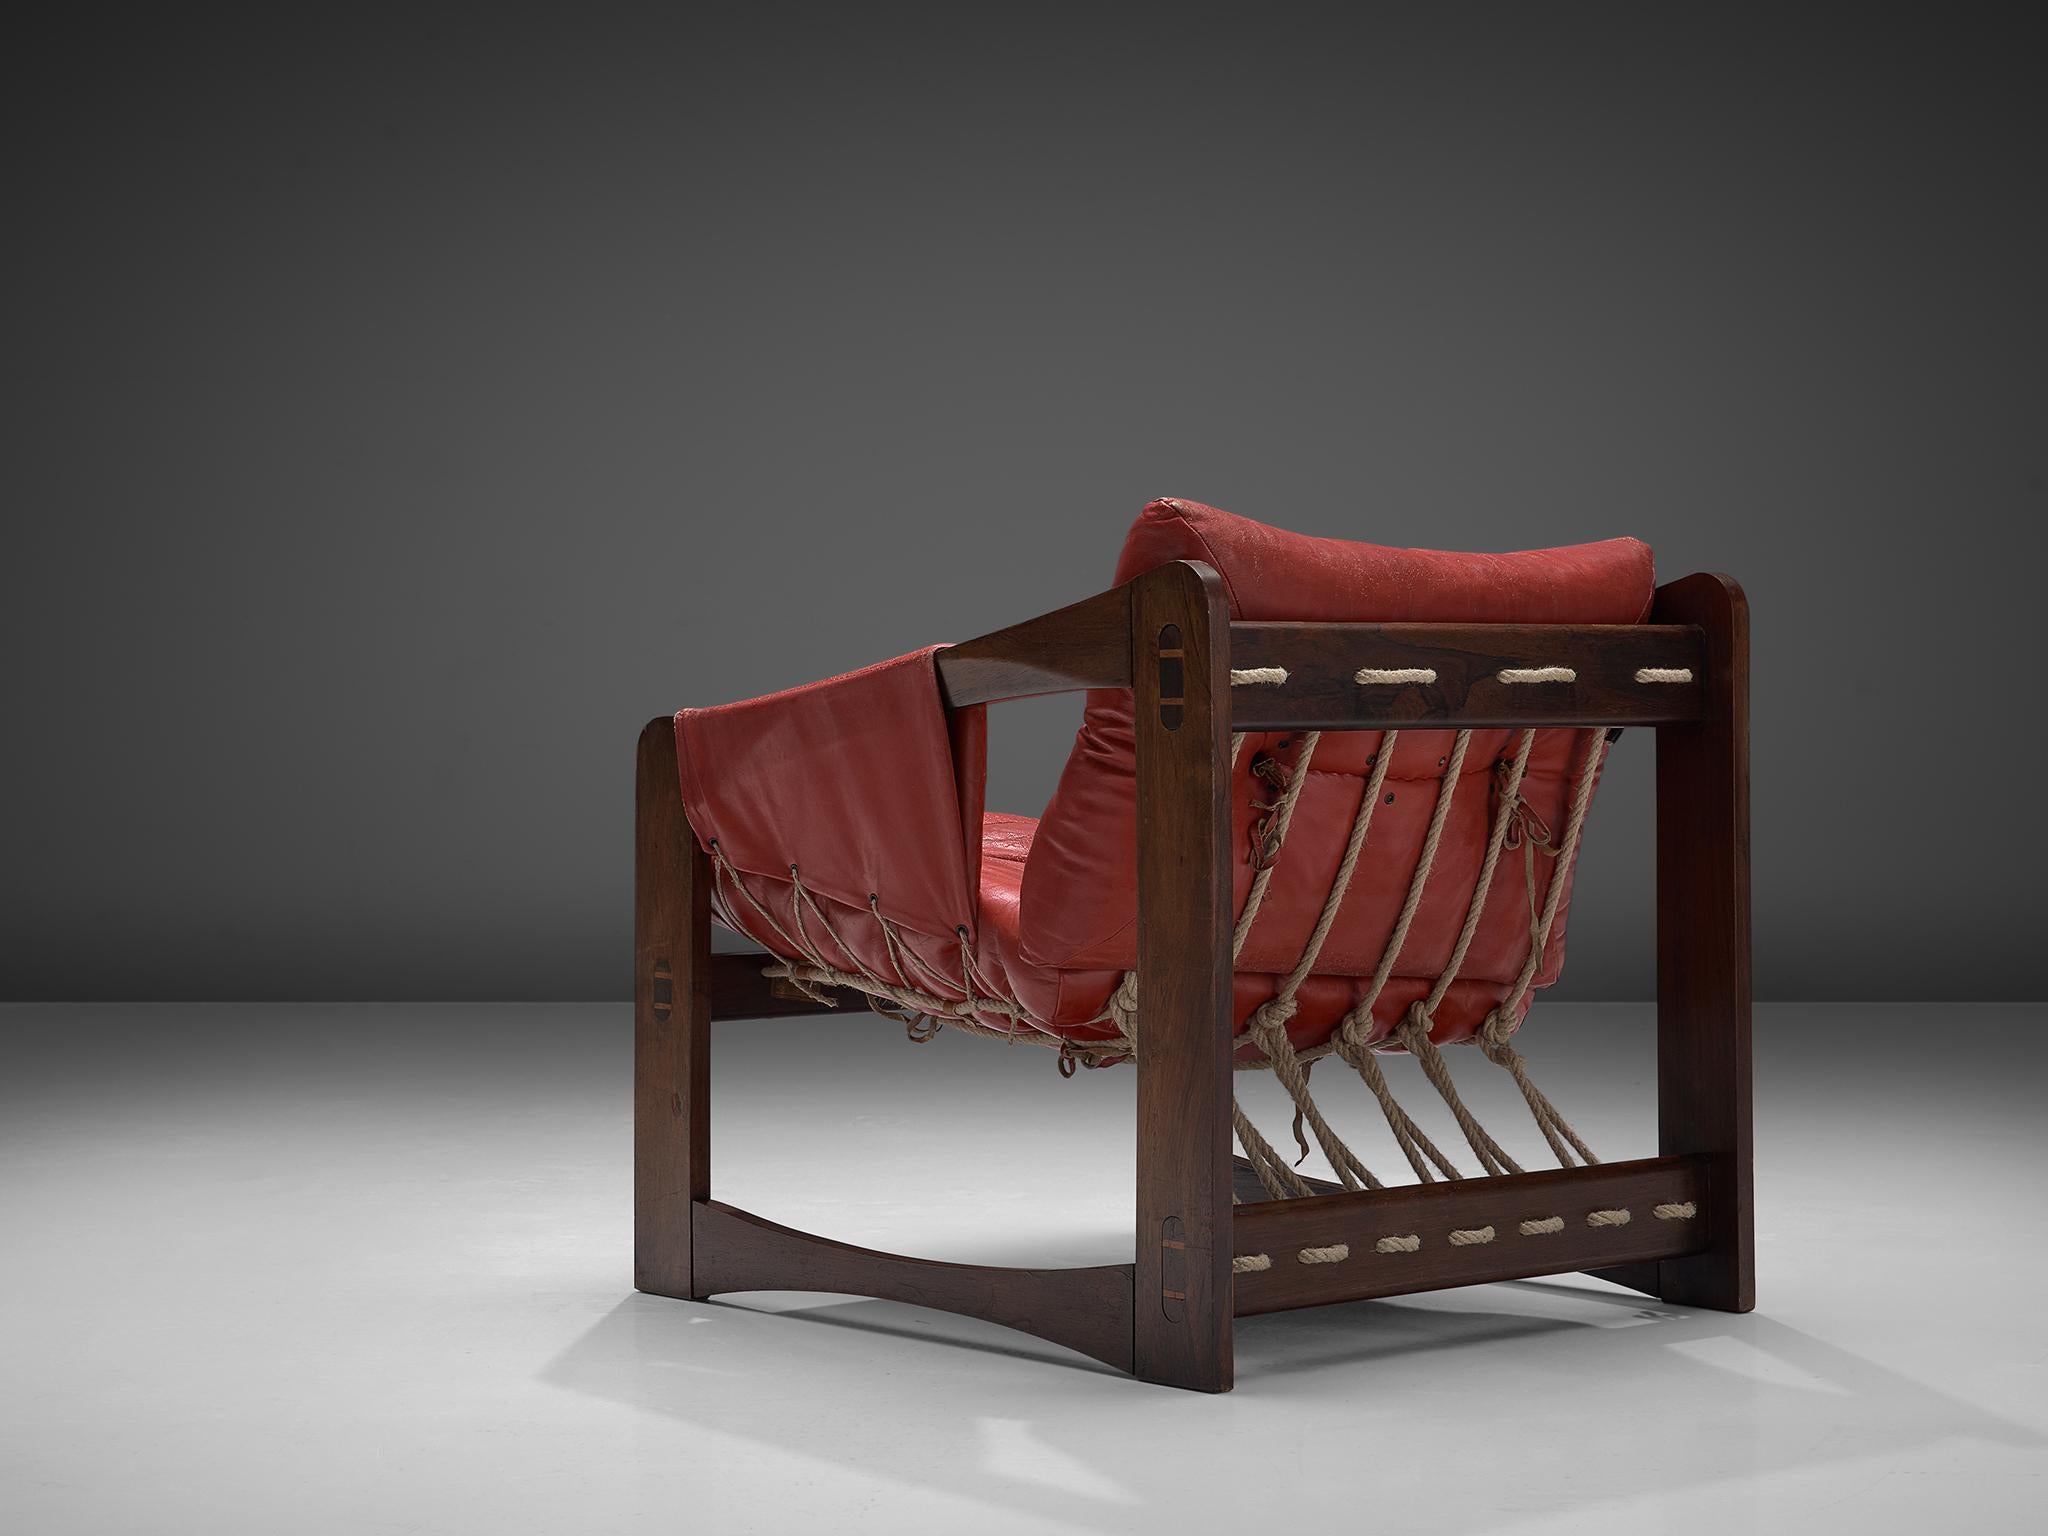 Liceu de Artes e Oficios Sao Paulo, lounge chair, in leather and wood, Brazil, 1960s.

Exquisite comfortable lounge chair made of solid dark stained wooden construction accompanied with nice contrasting ropes. Besides the aesthetic addition of the